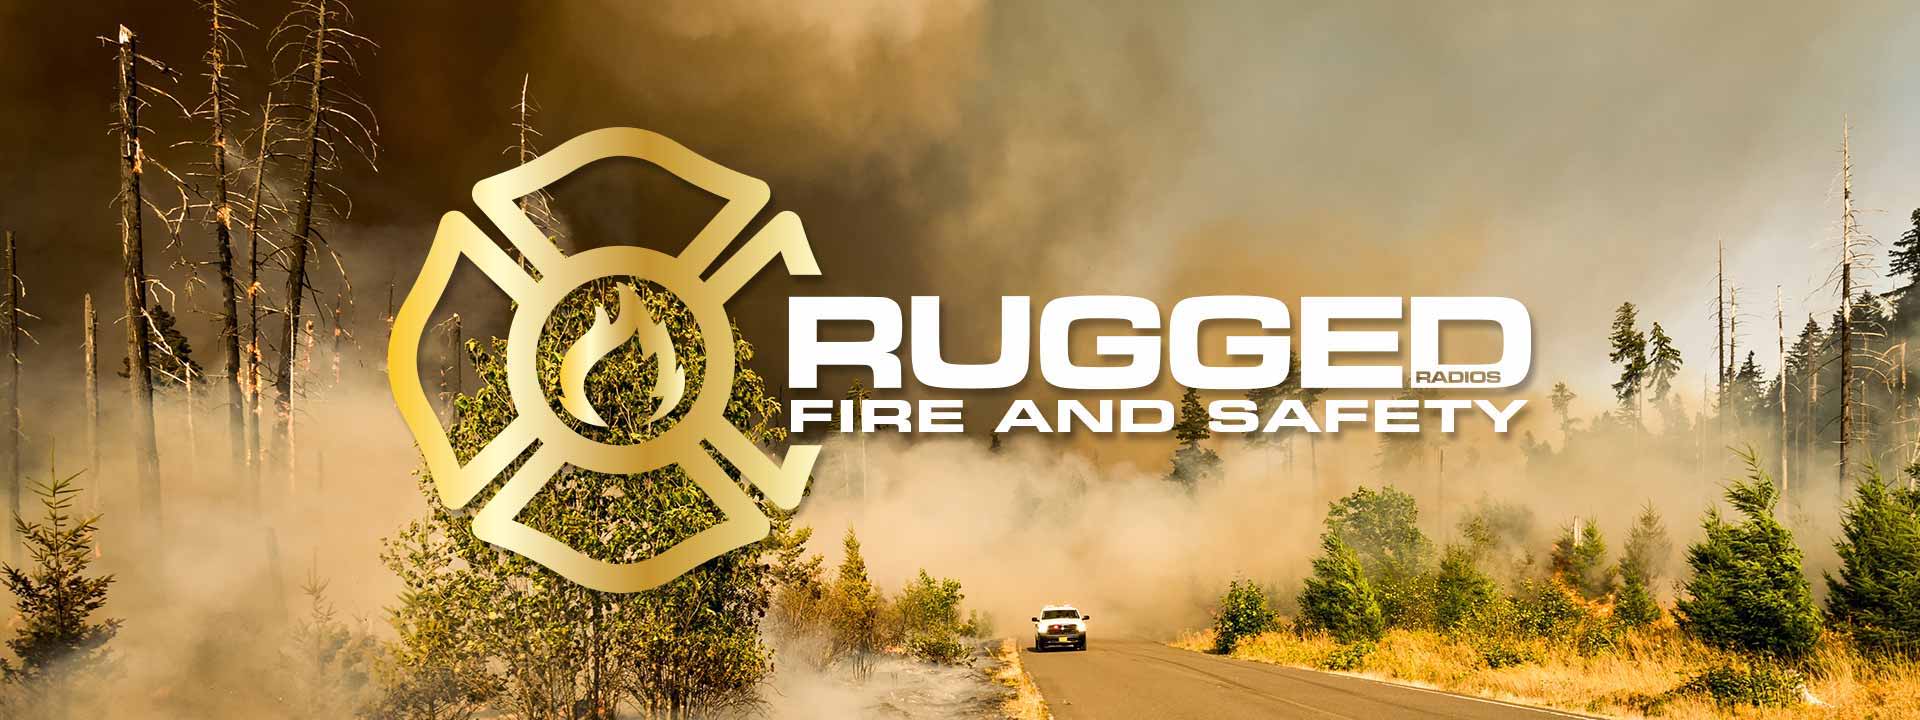 Rugged Radios Fire Truck Intercoms and Headsets